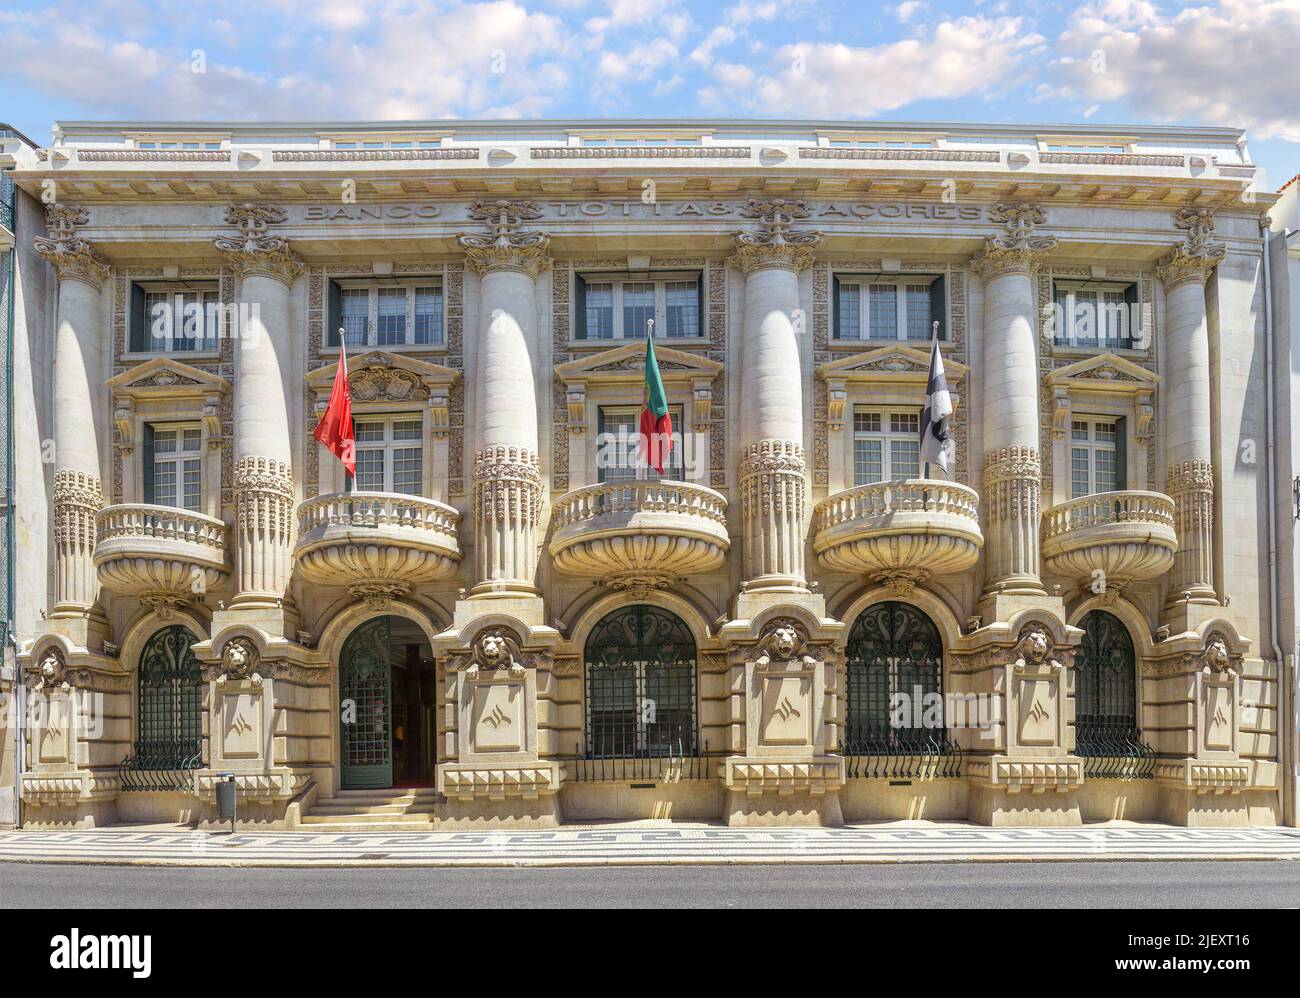 The building of headquarters of the Portuguese bank Banco Totta and Acores. Lisbon, Portugal Stock Photo